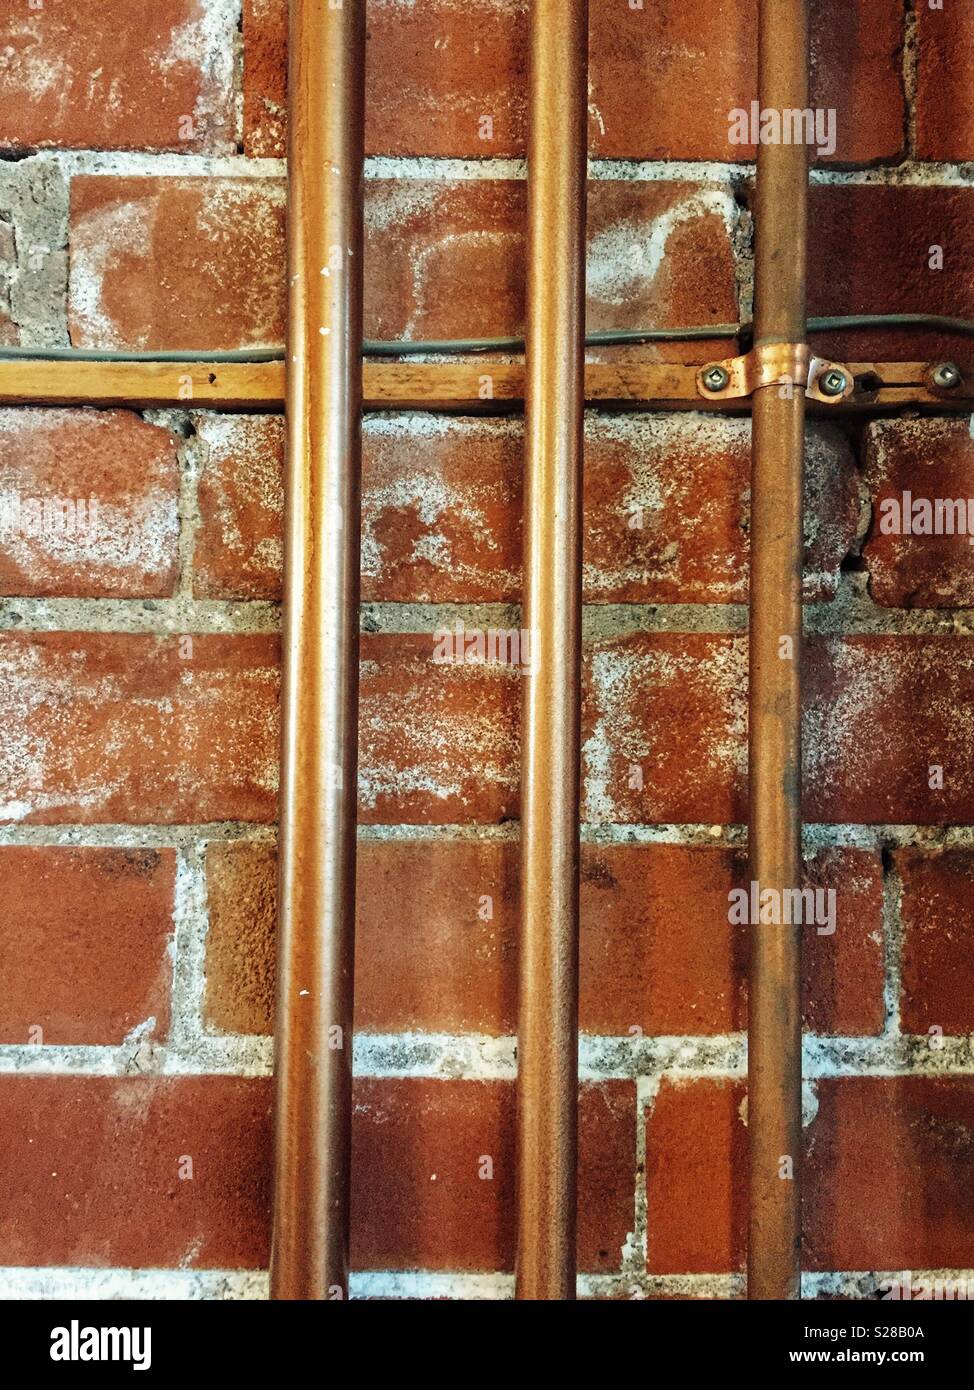 Copper pipes and old brick wall Stock Photo